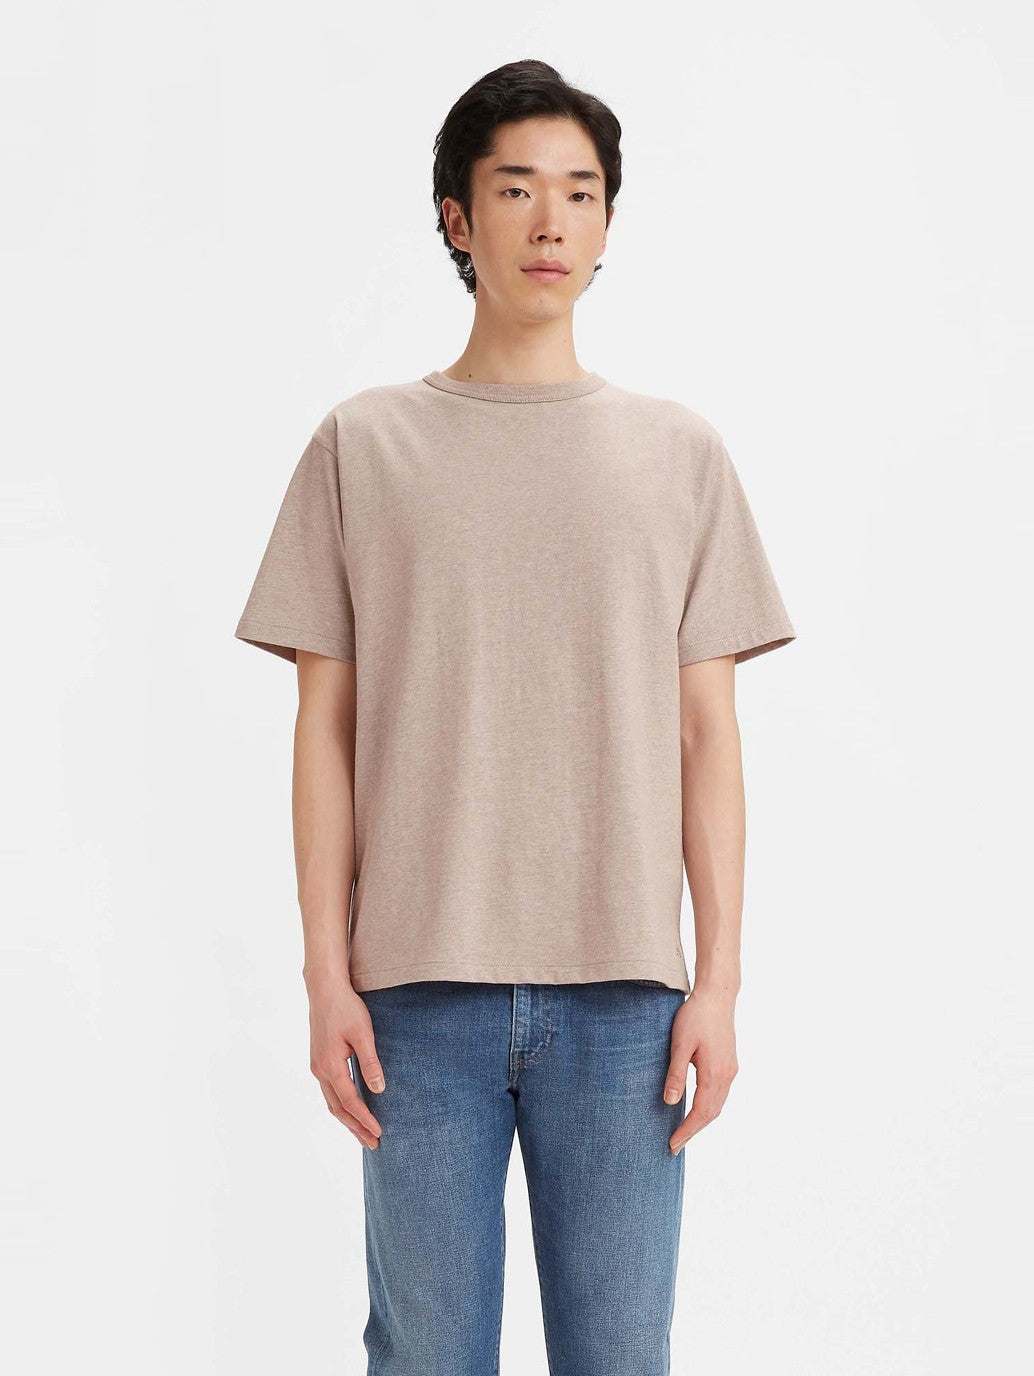 Levi's® Made & Crafted® Men's Classic Tee